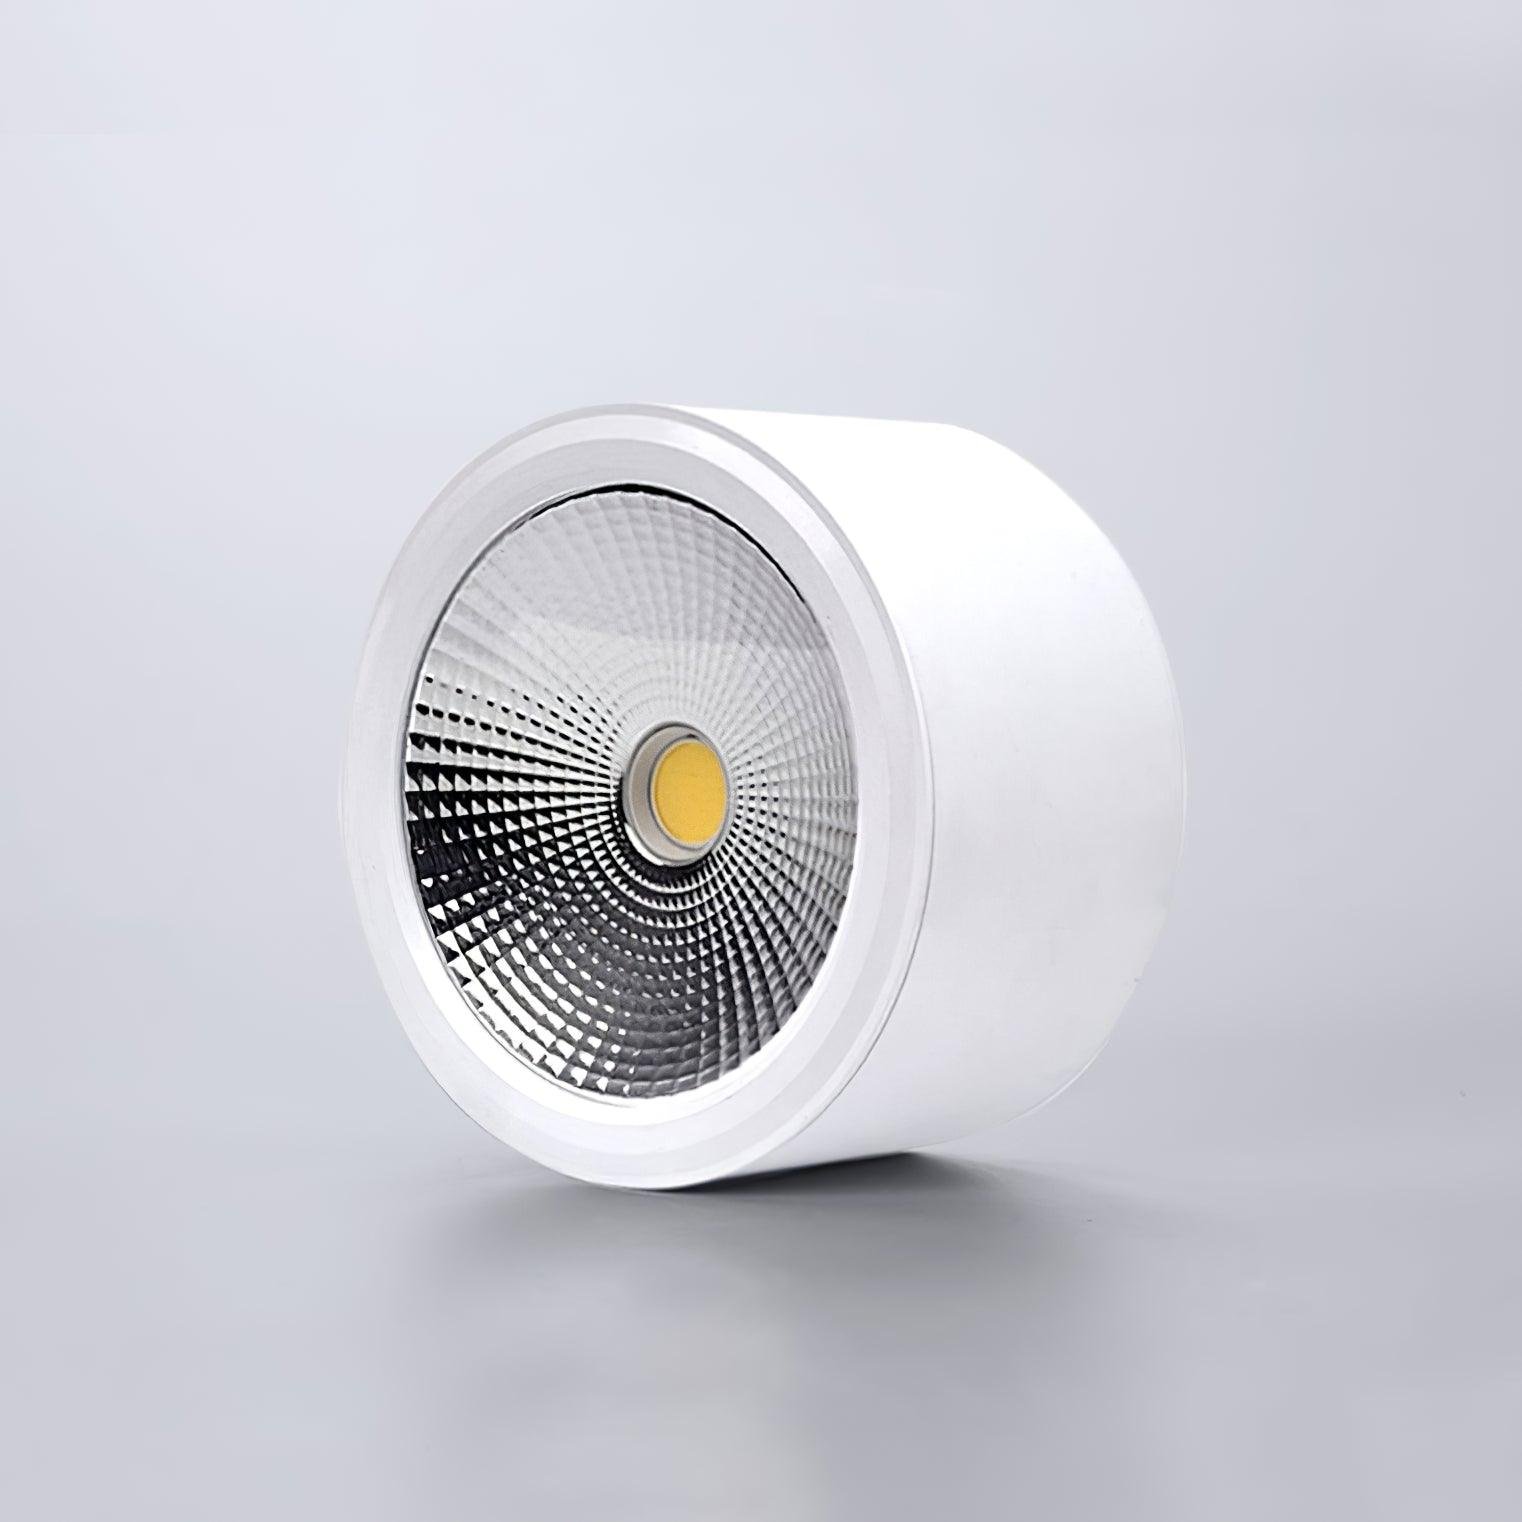 Anzio Spotlights in White with Cool Light - Set of 5, 4.5" Diameter and 2.6" Height